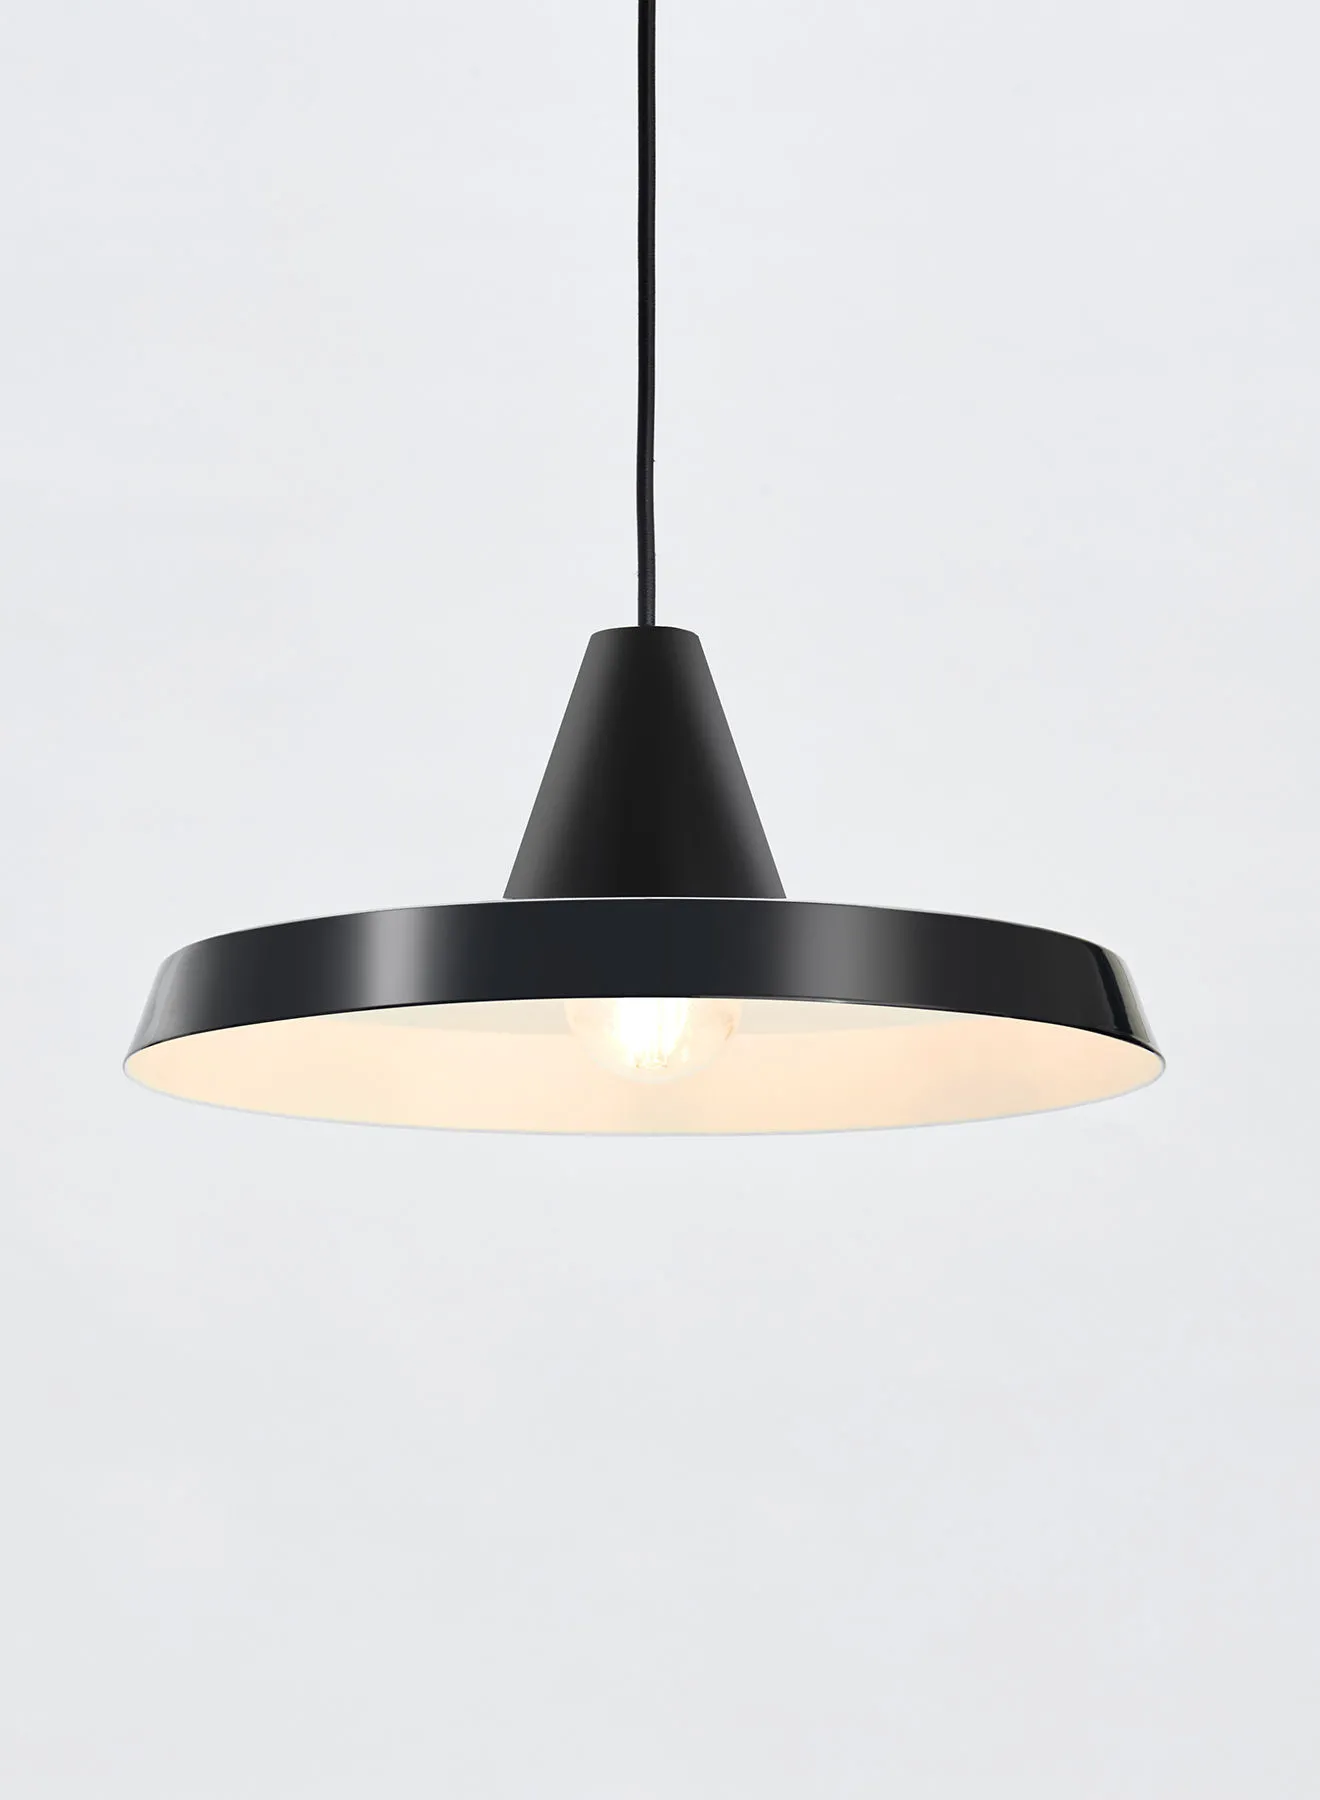 Switch Decorative Pendant Lamp Unique Luxury Quality Material for the Perfect Stylish Home PL010410 Black 35cm